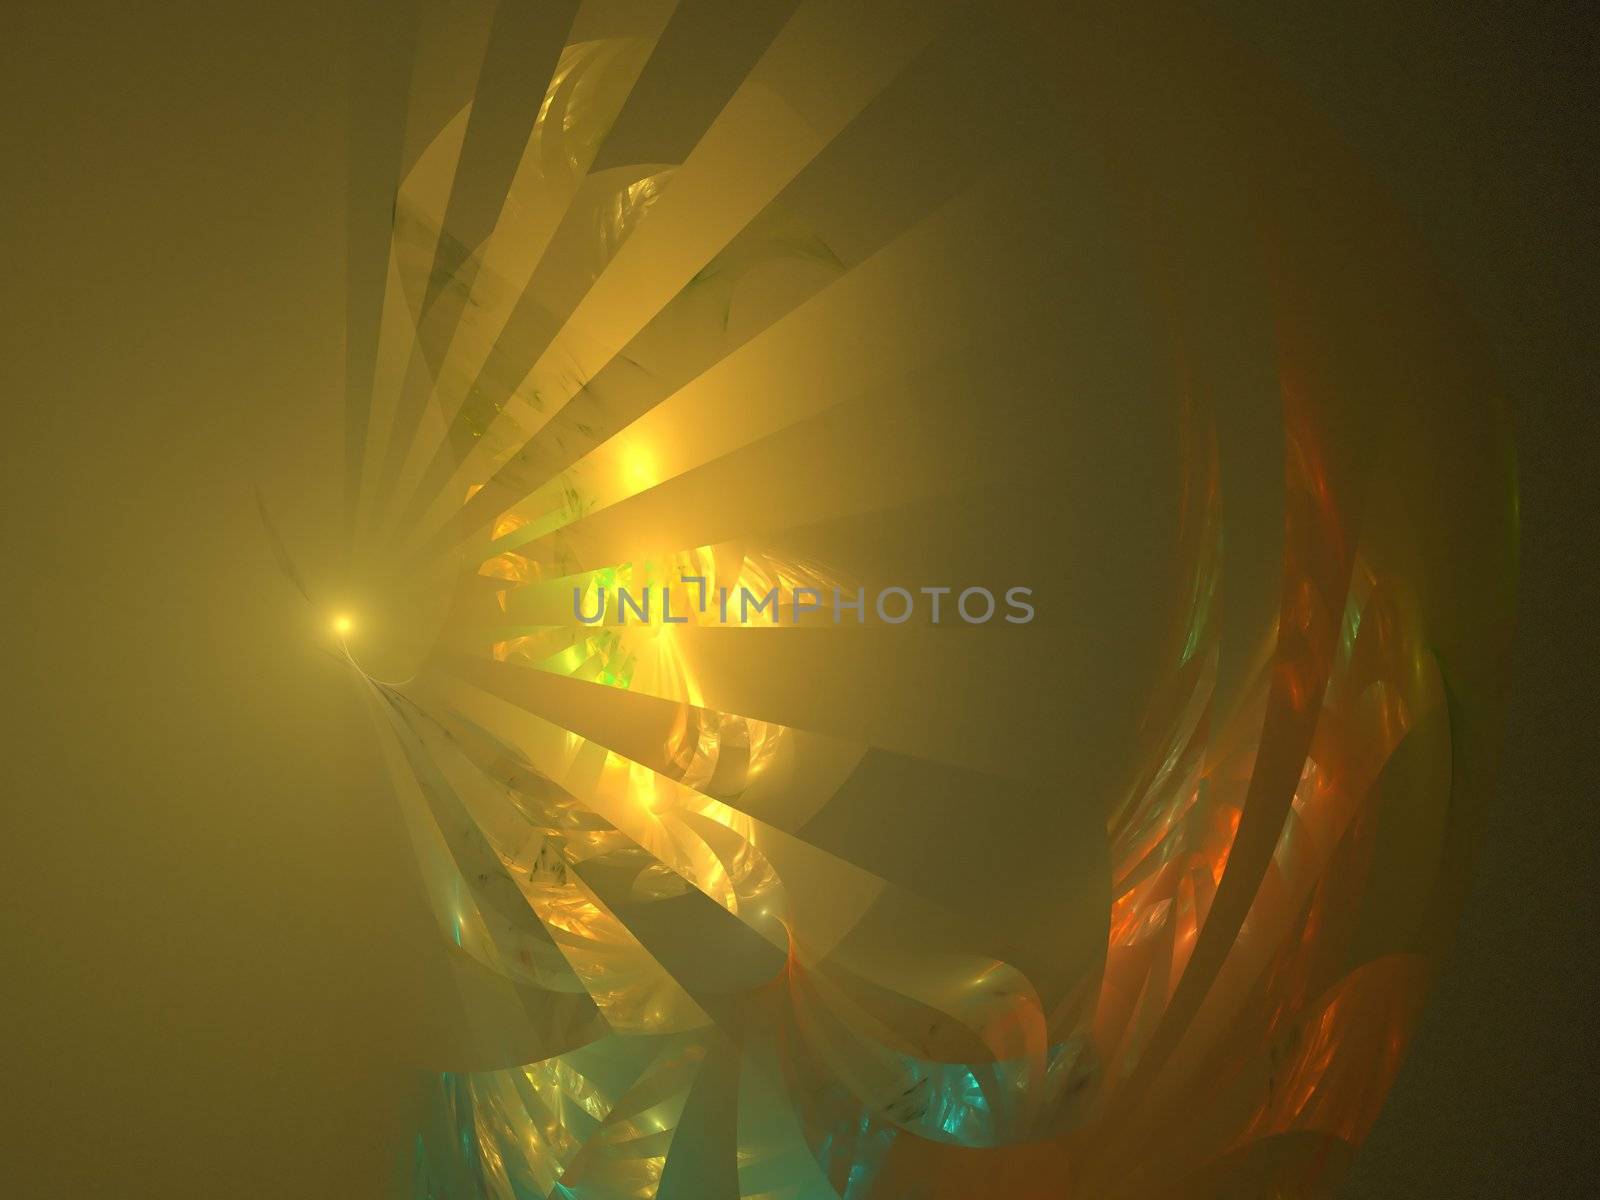 Colorful abstract fractal background